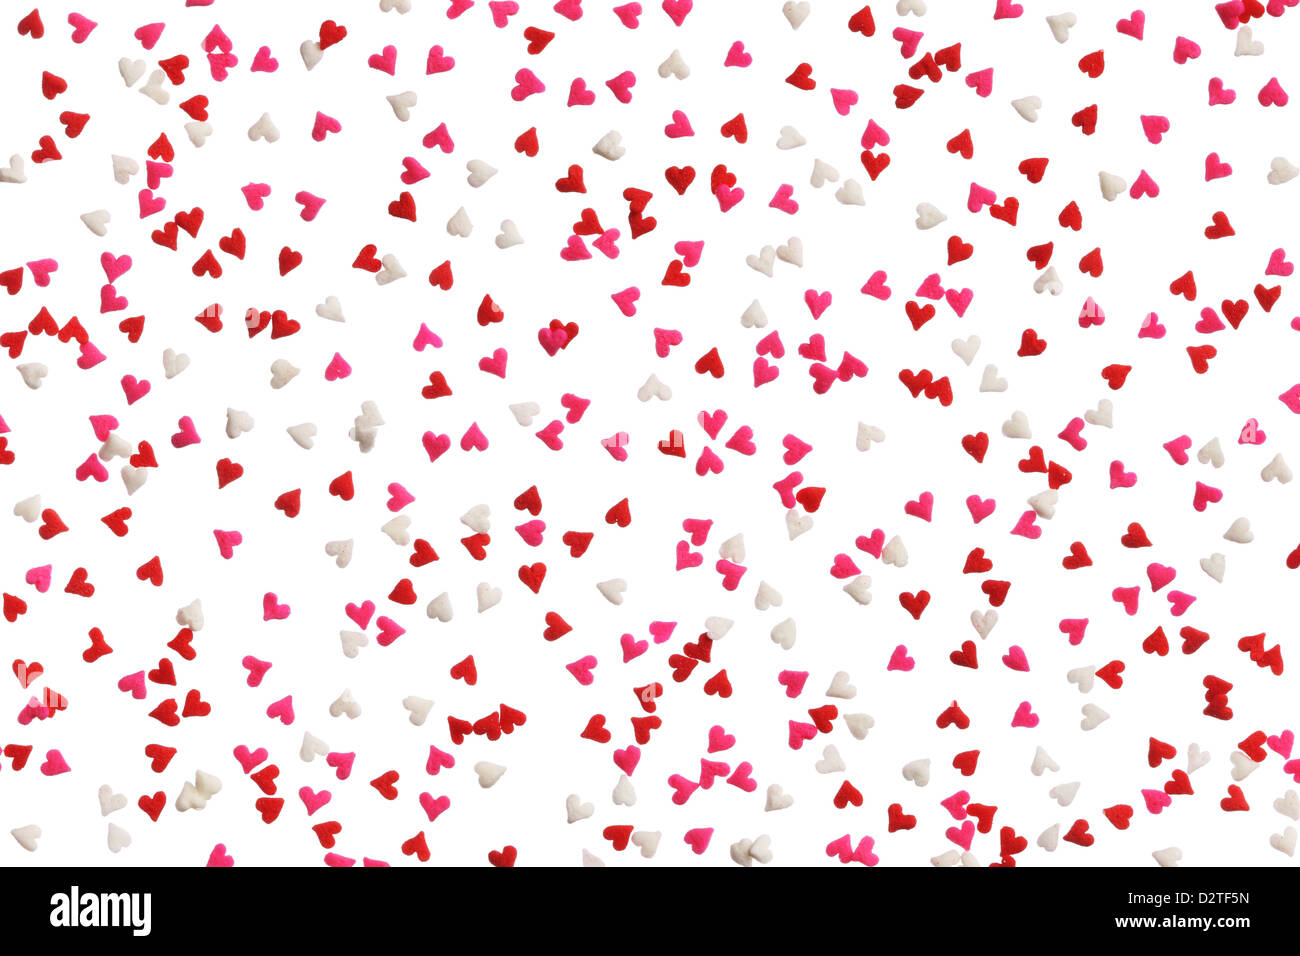 Background of heart sprinkles in red, pink and white Stock Photo